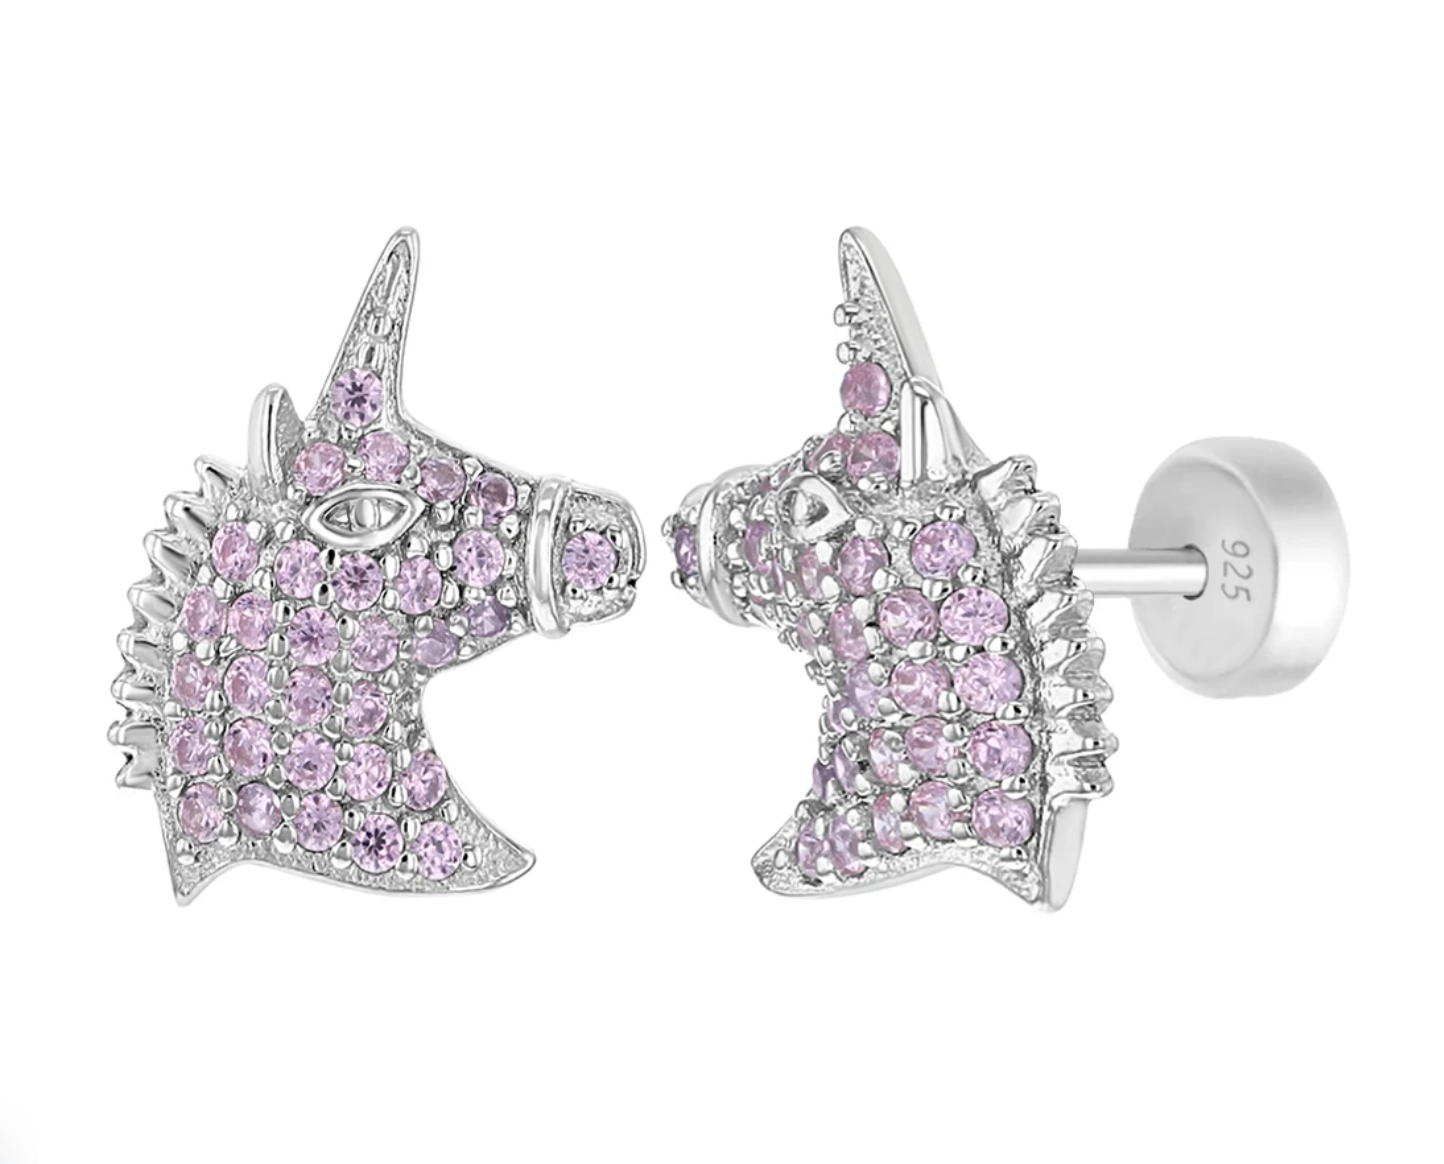 925 Sterling Silver Cubic Zirconia Magical Unicorn Safety Stud Earrings for Toddlers & Little Girls - Pink